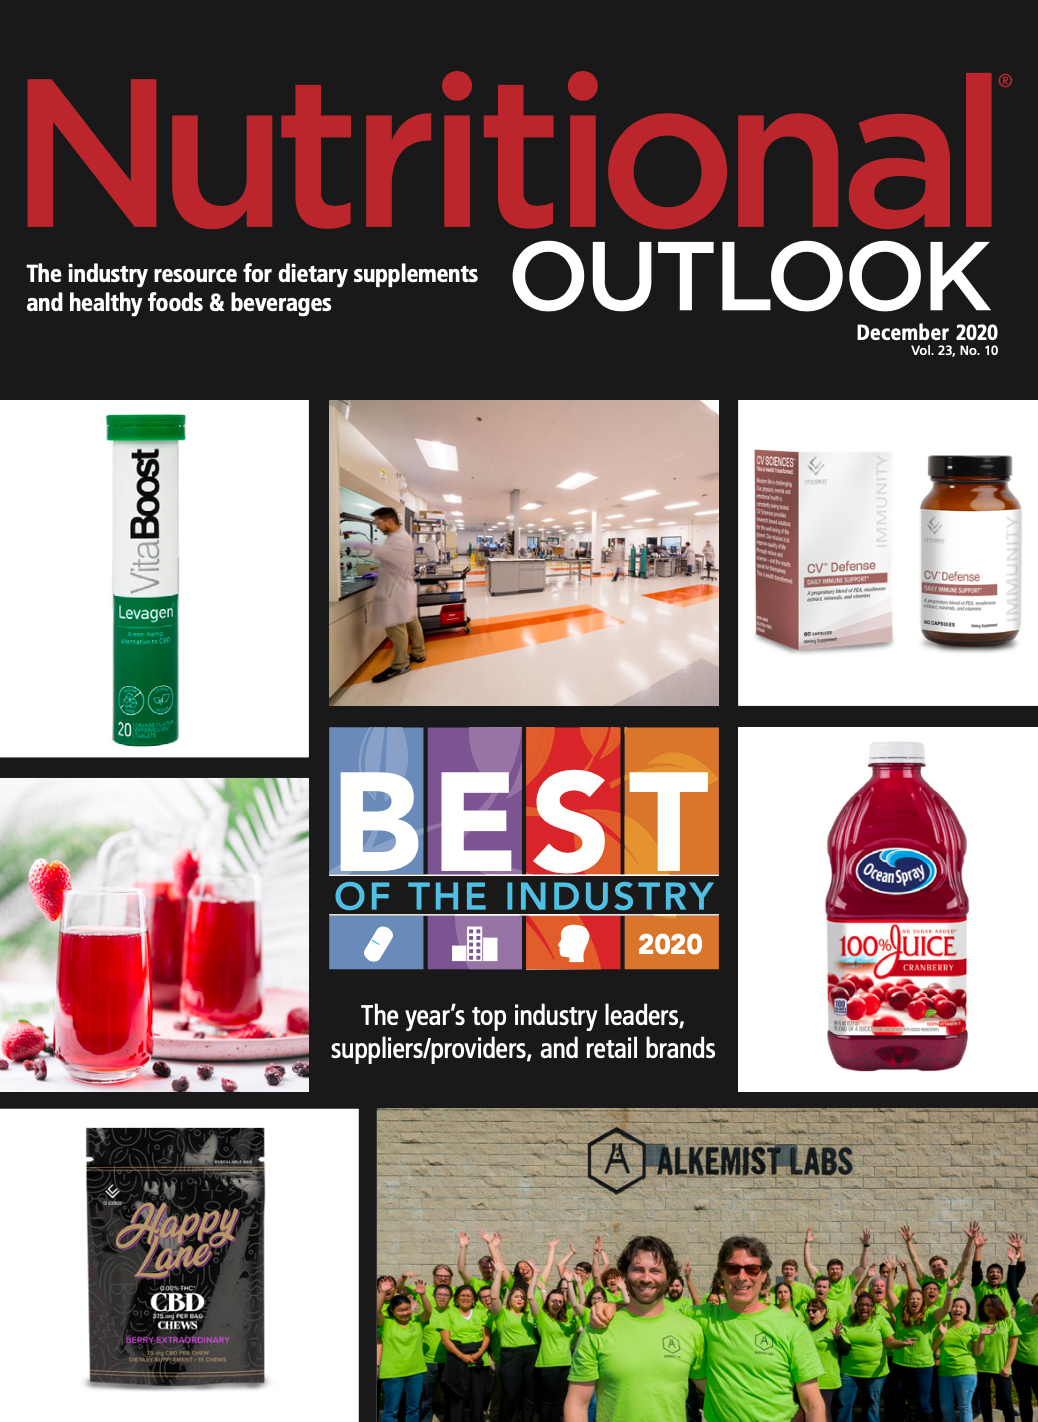 Nutritional Outlook Vol. 23 No. 10